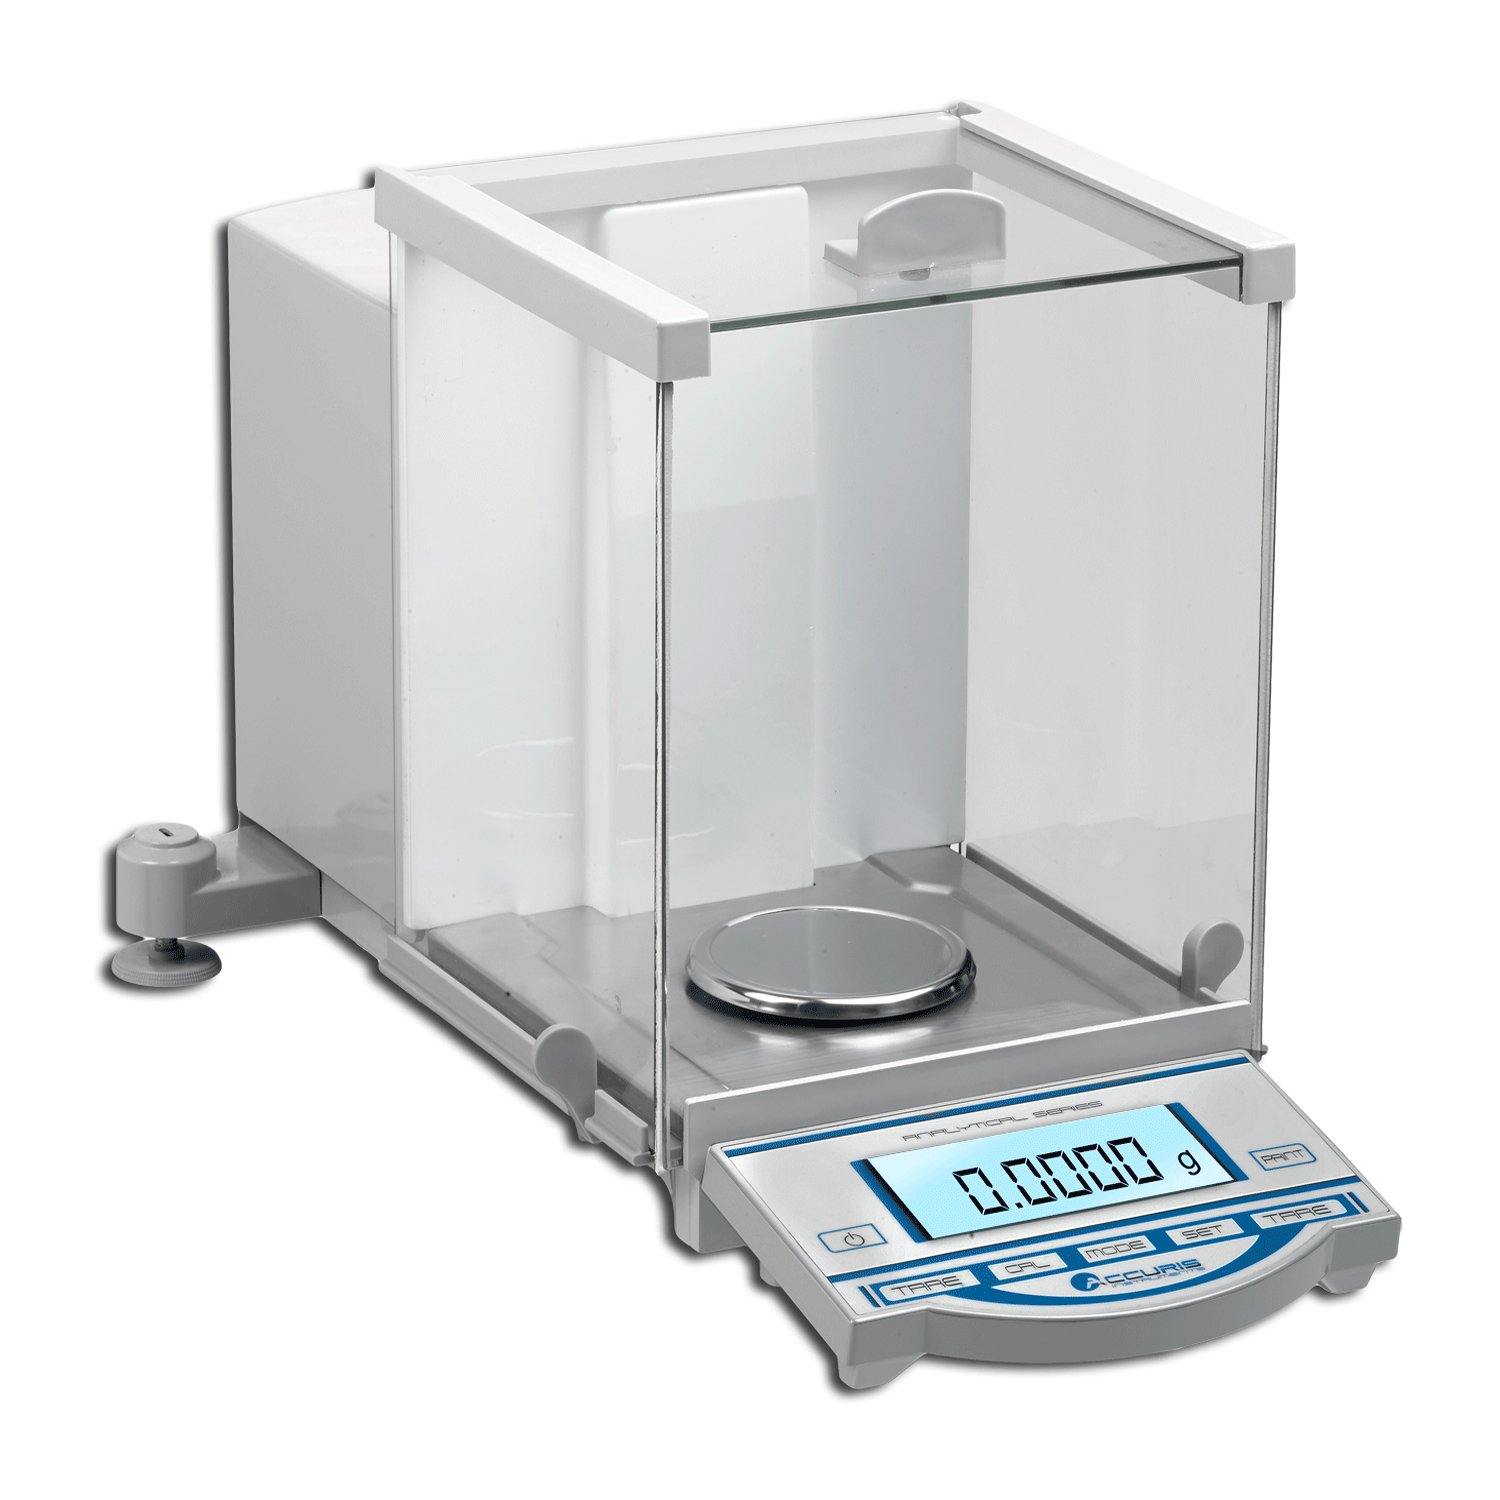 Accuris W3100-120 Analytical Balance, 120 grams